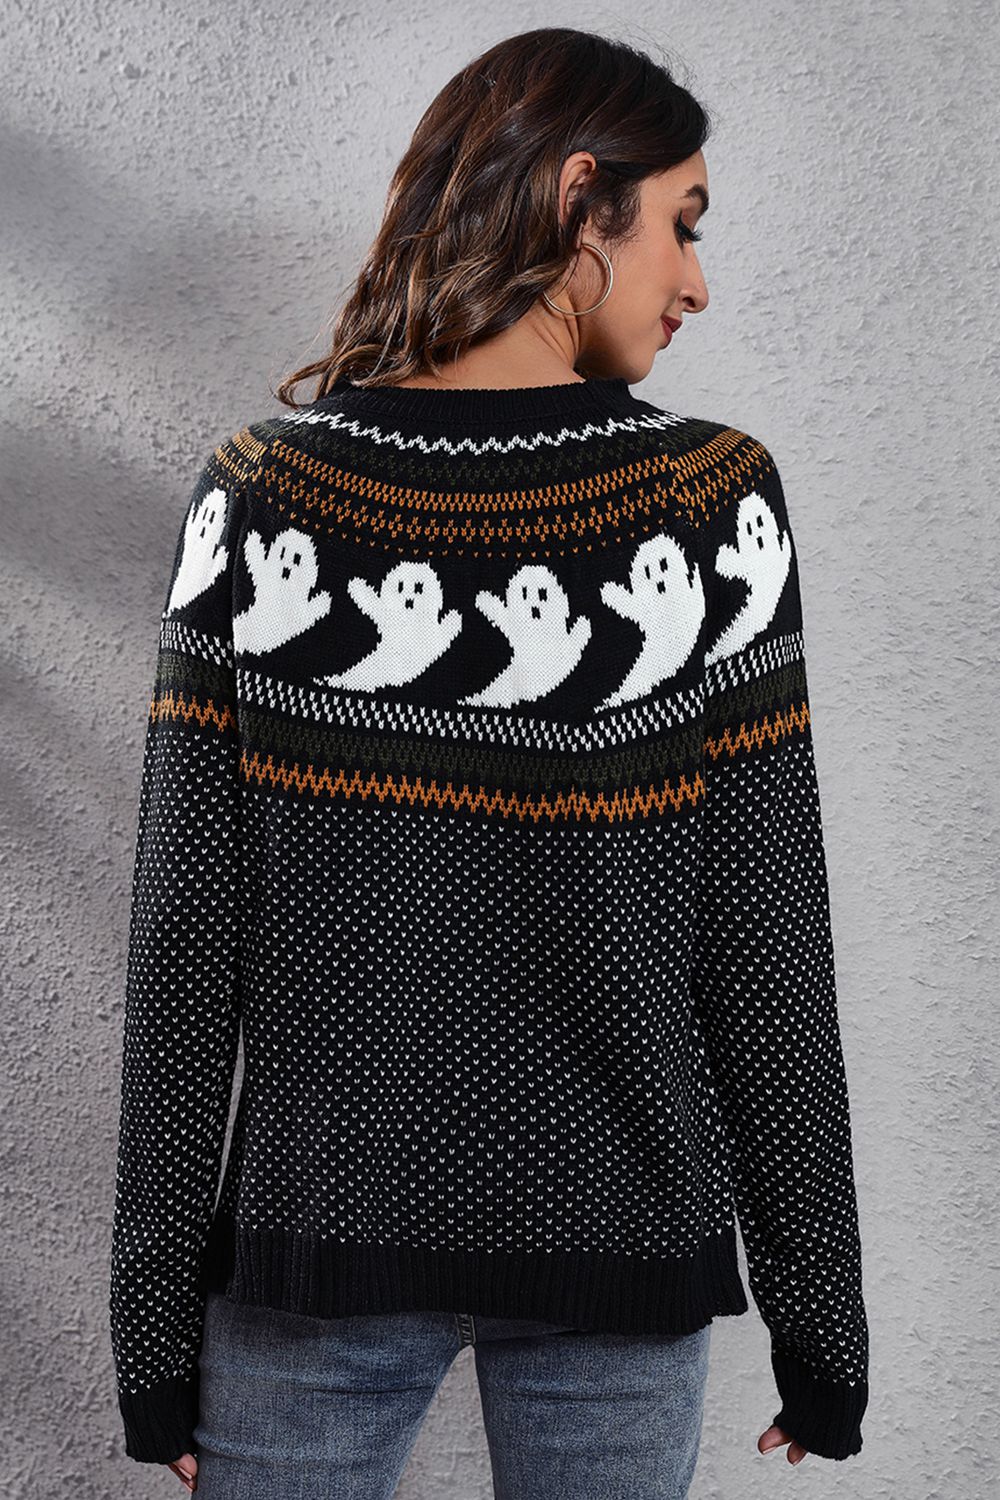 7 Colors - Ghost Pattern Round Neck Long Sleeve Sweater - Sizes S-2XL Ti Amo I love you